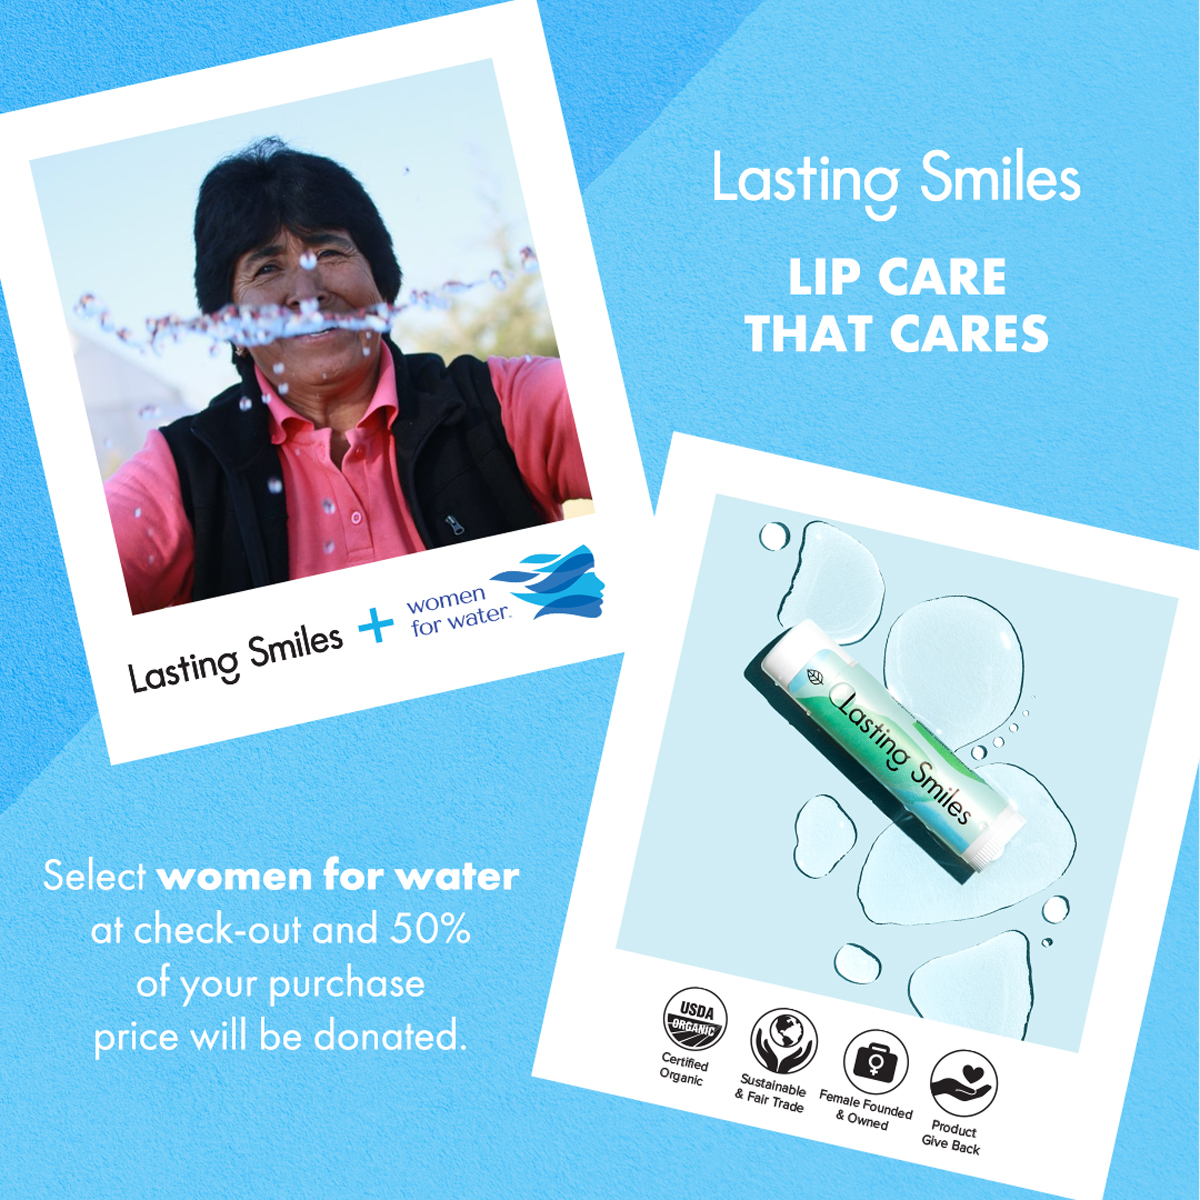 The Lasting Smiles and women for water partnership enables consumers to hydrate their lips while donating 50% of their purchase price to help Americans in need gain access to safe water.